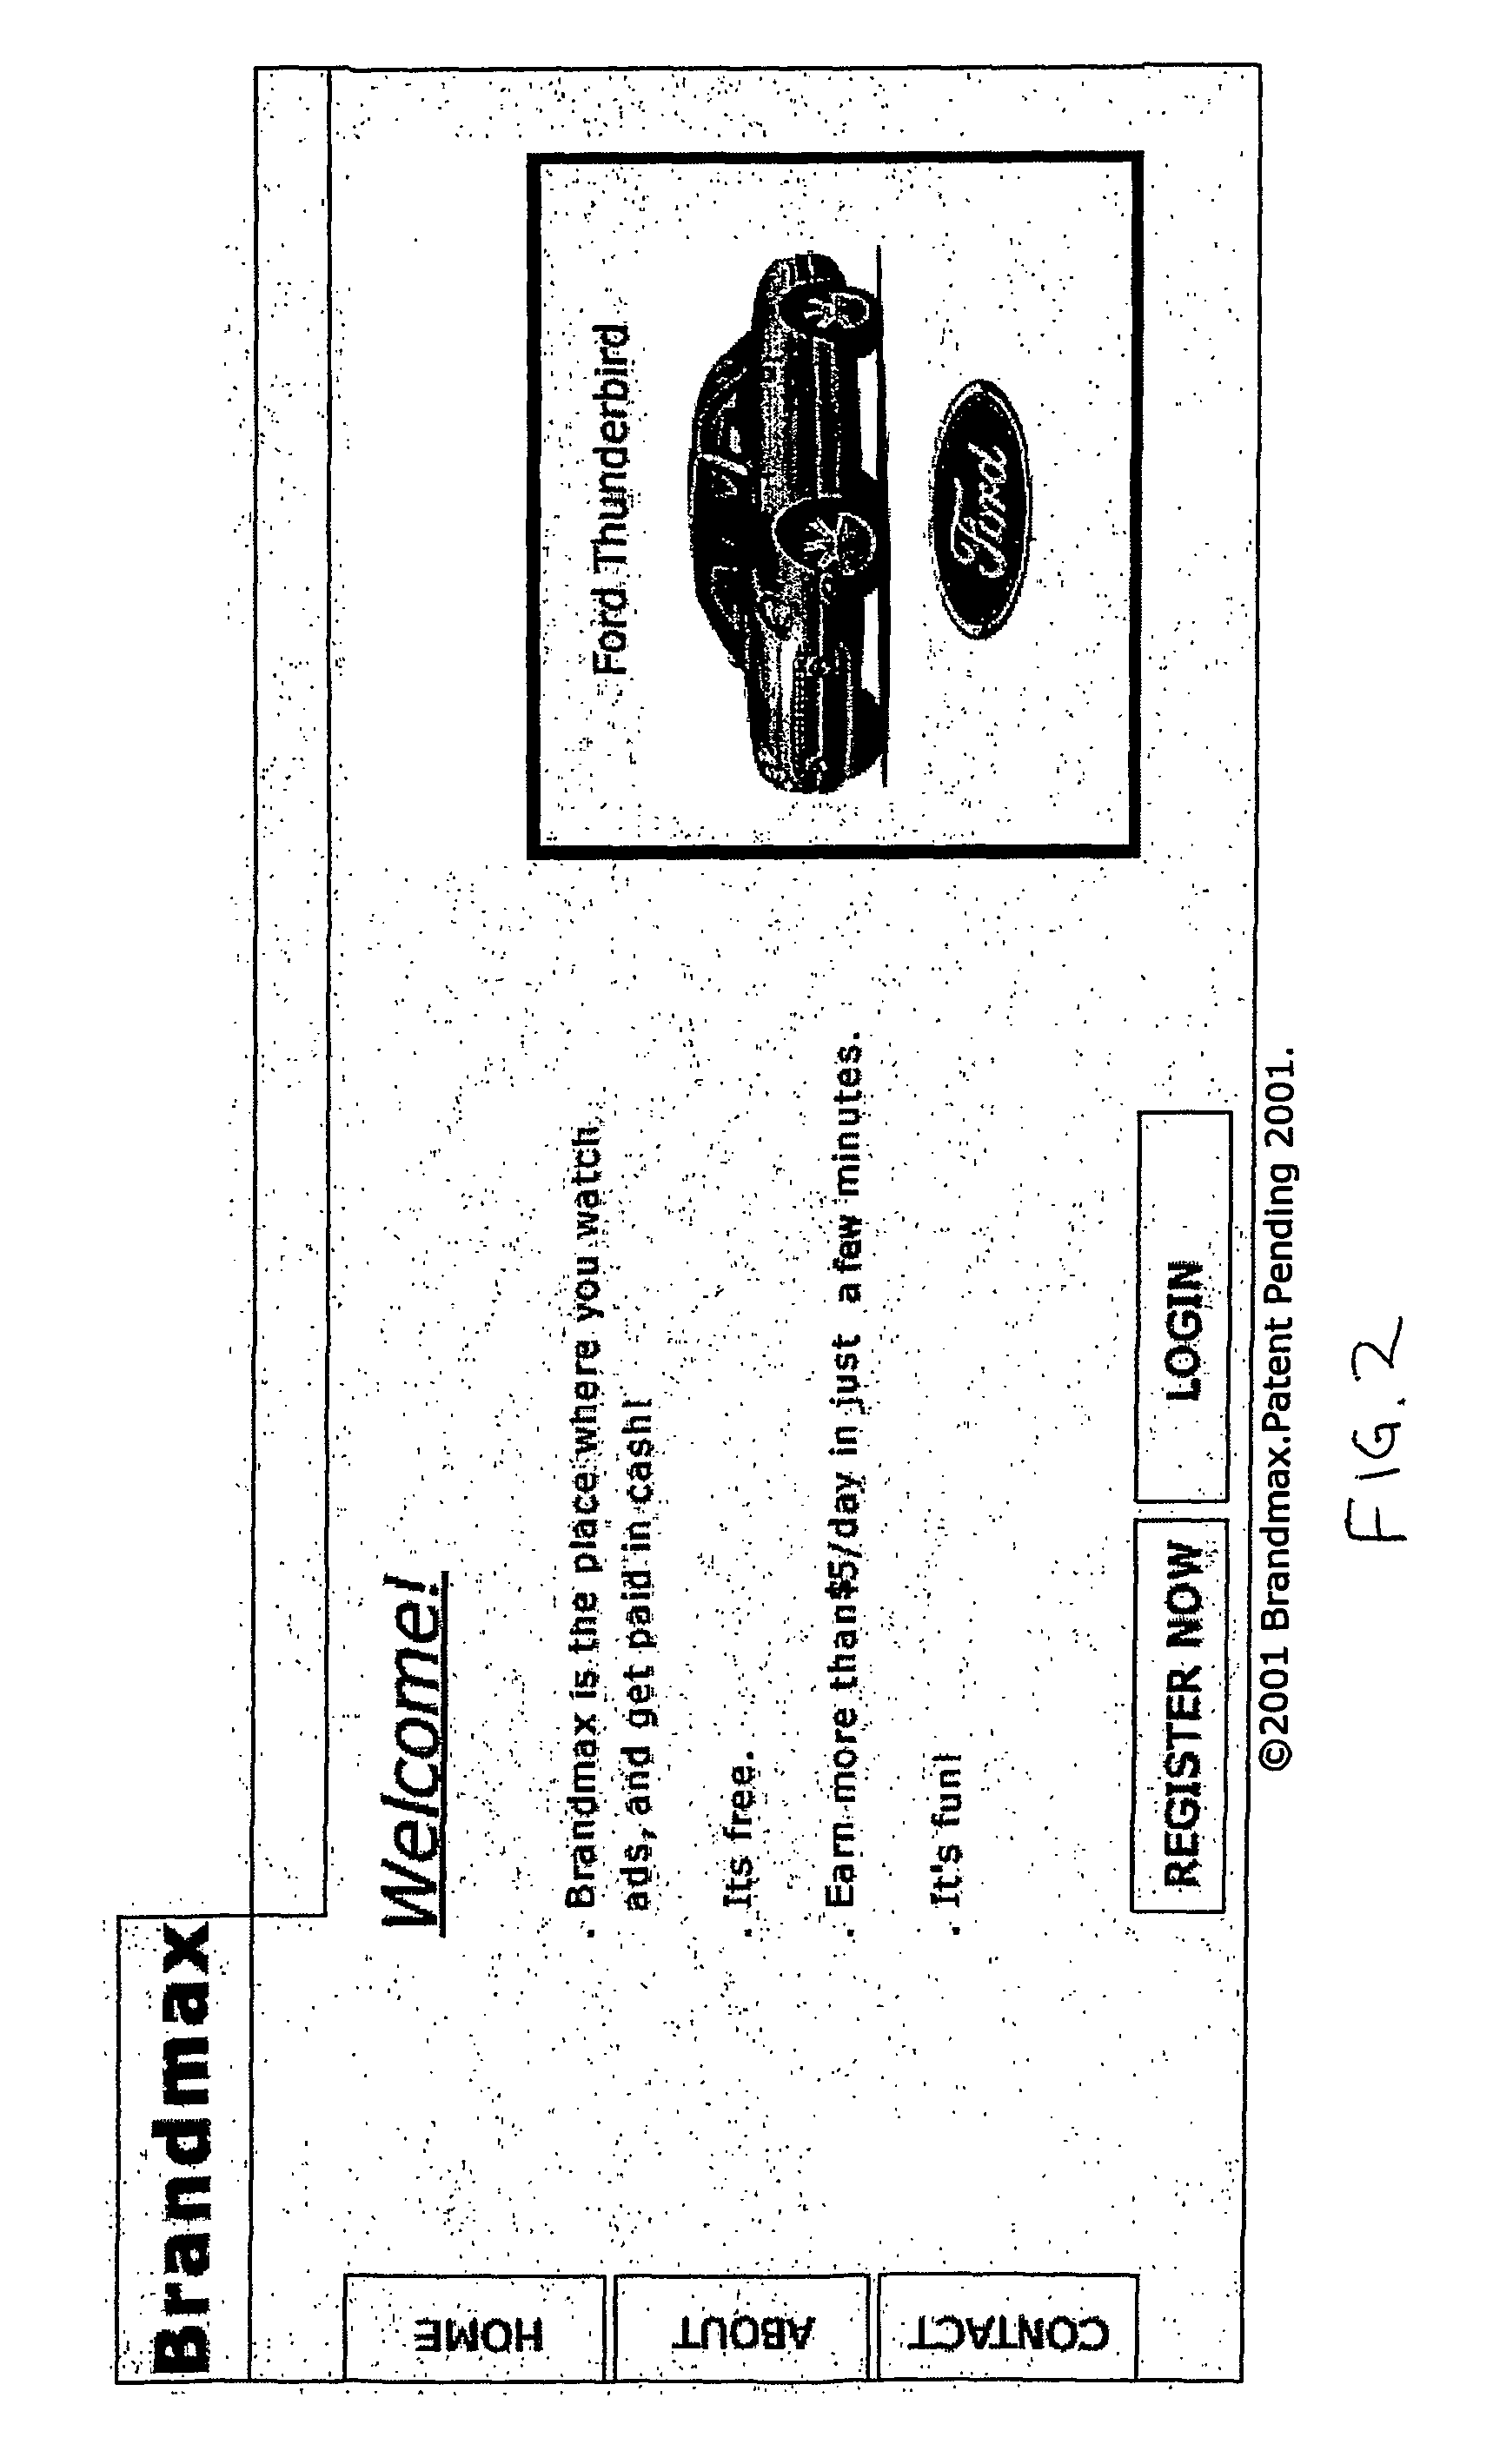 Method and system for providing interactive adversing cross reference to related application